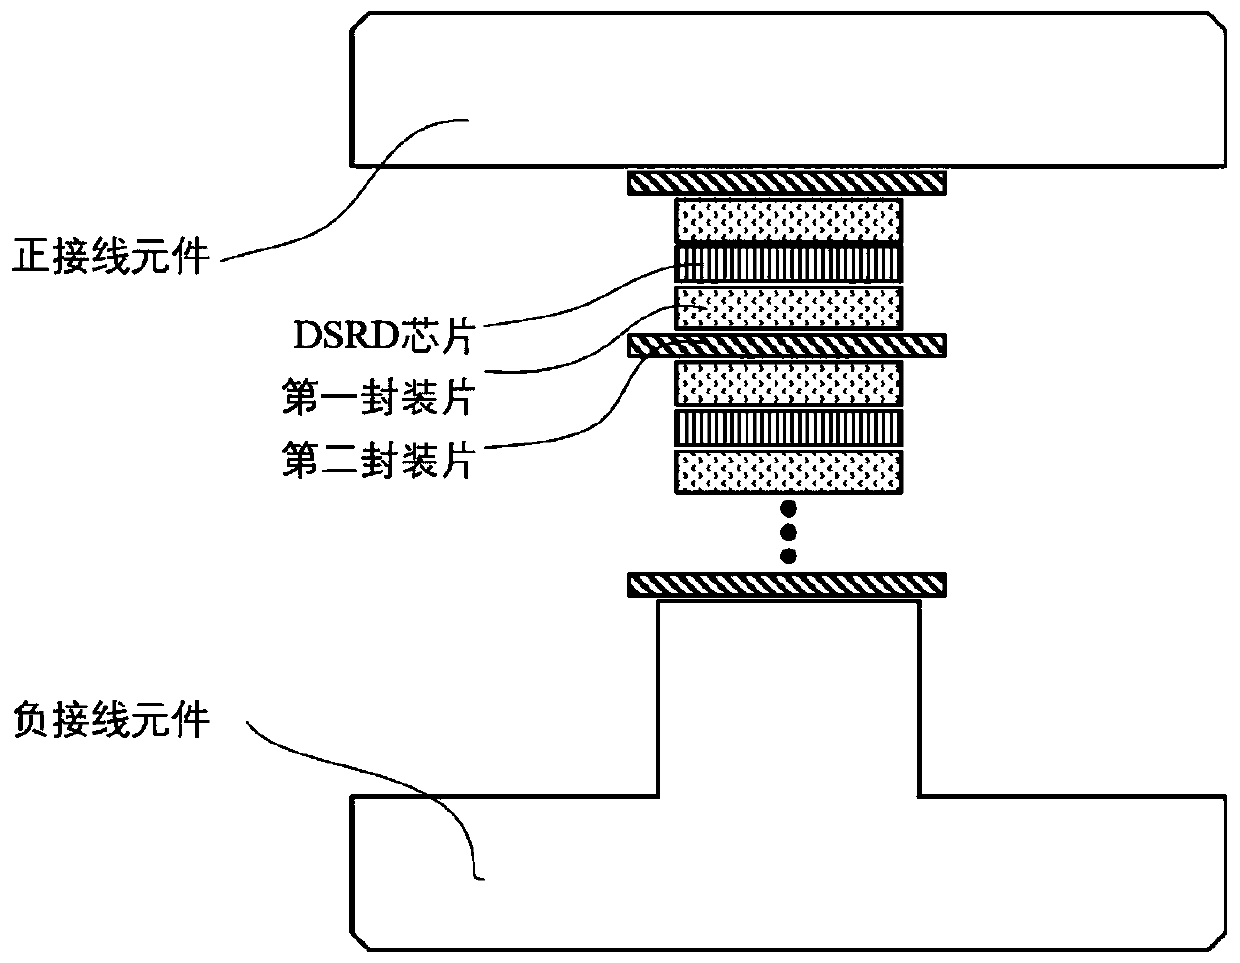 Stacked crimping packaging structure of silicon carbide DSRD